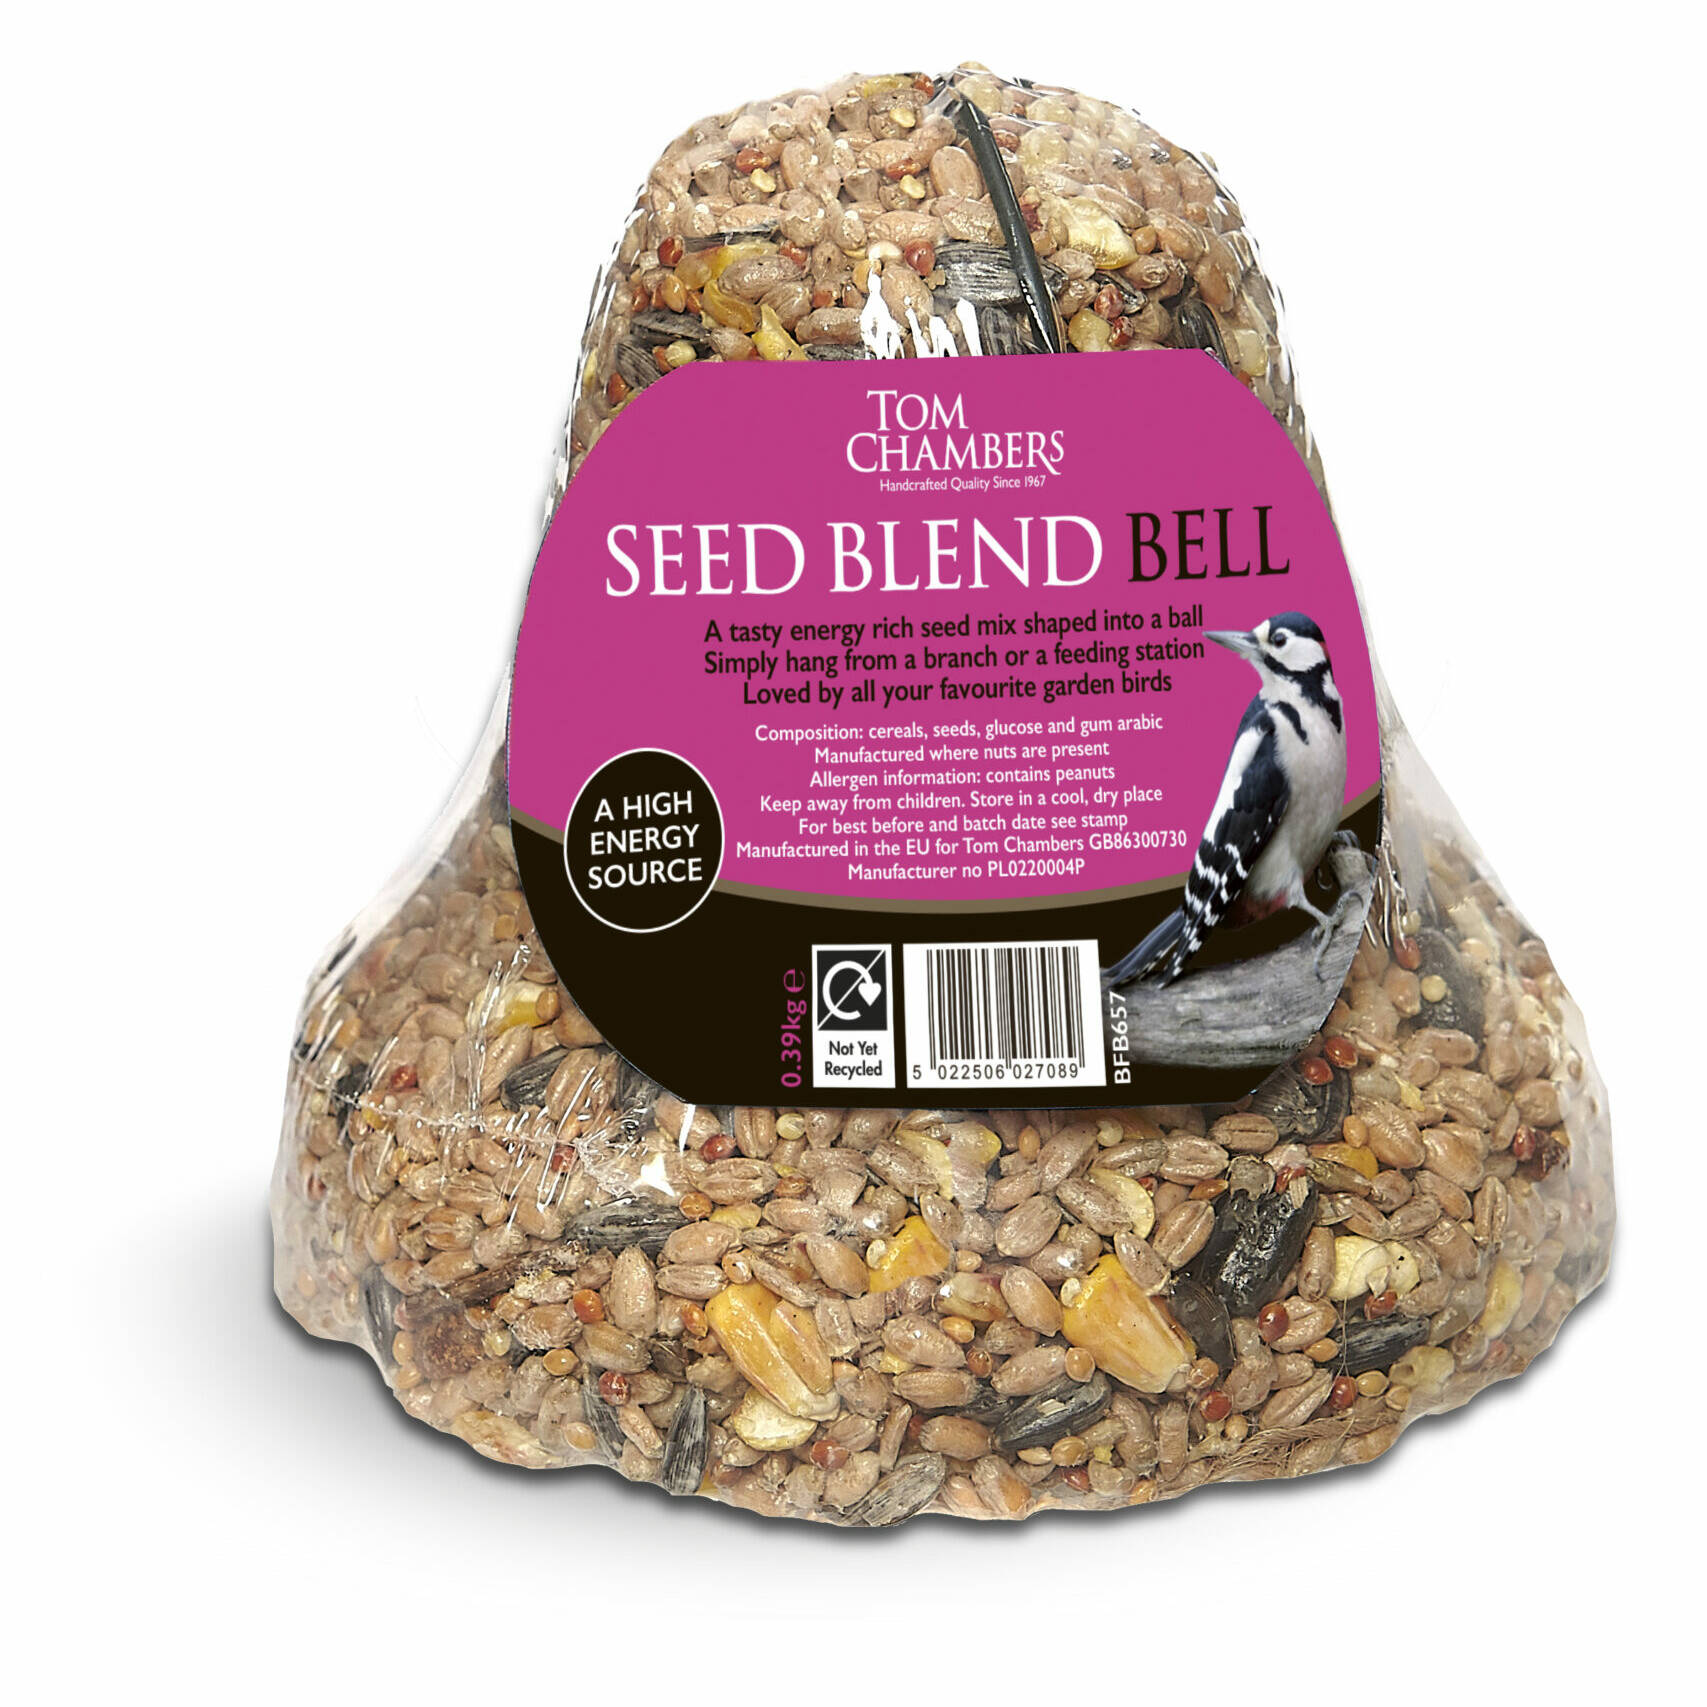 Tom chambers Seed Blend Bell